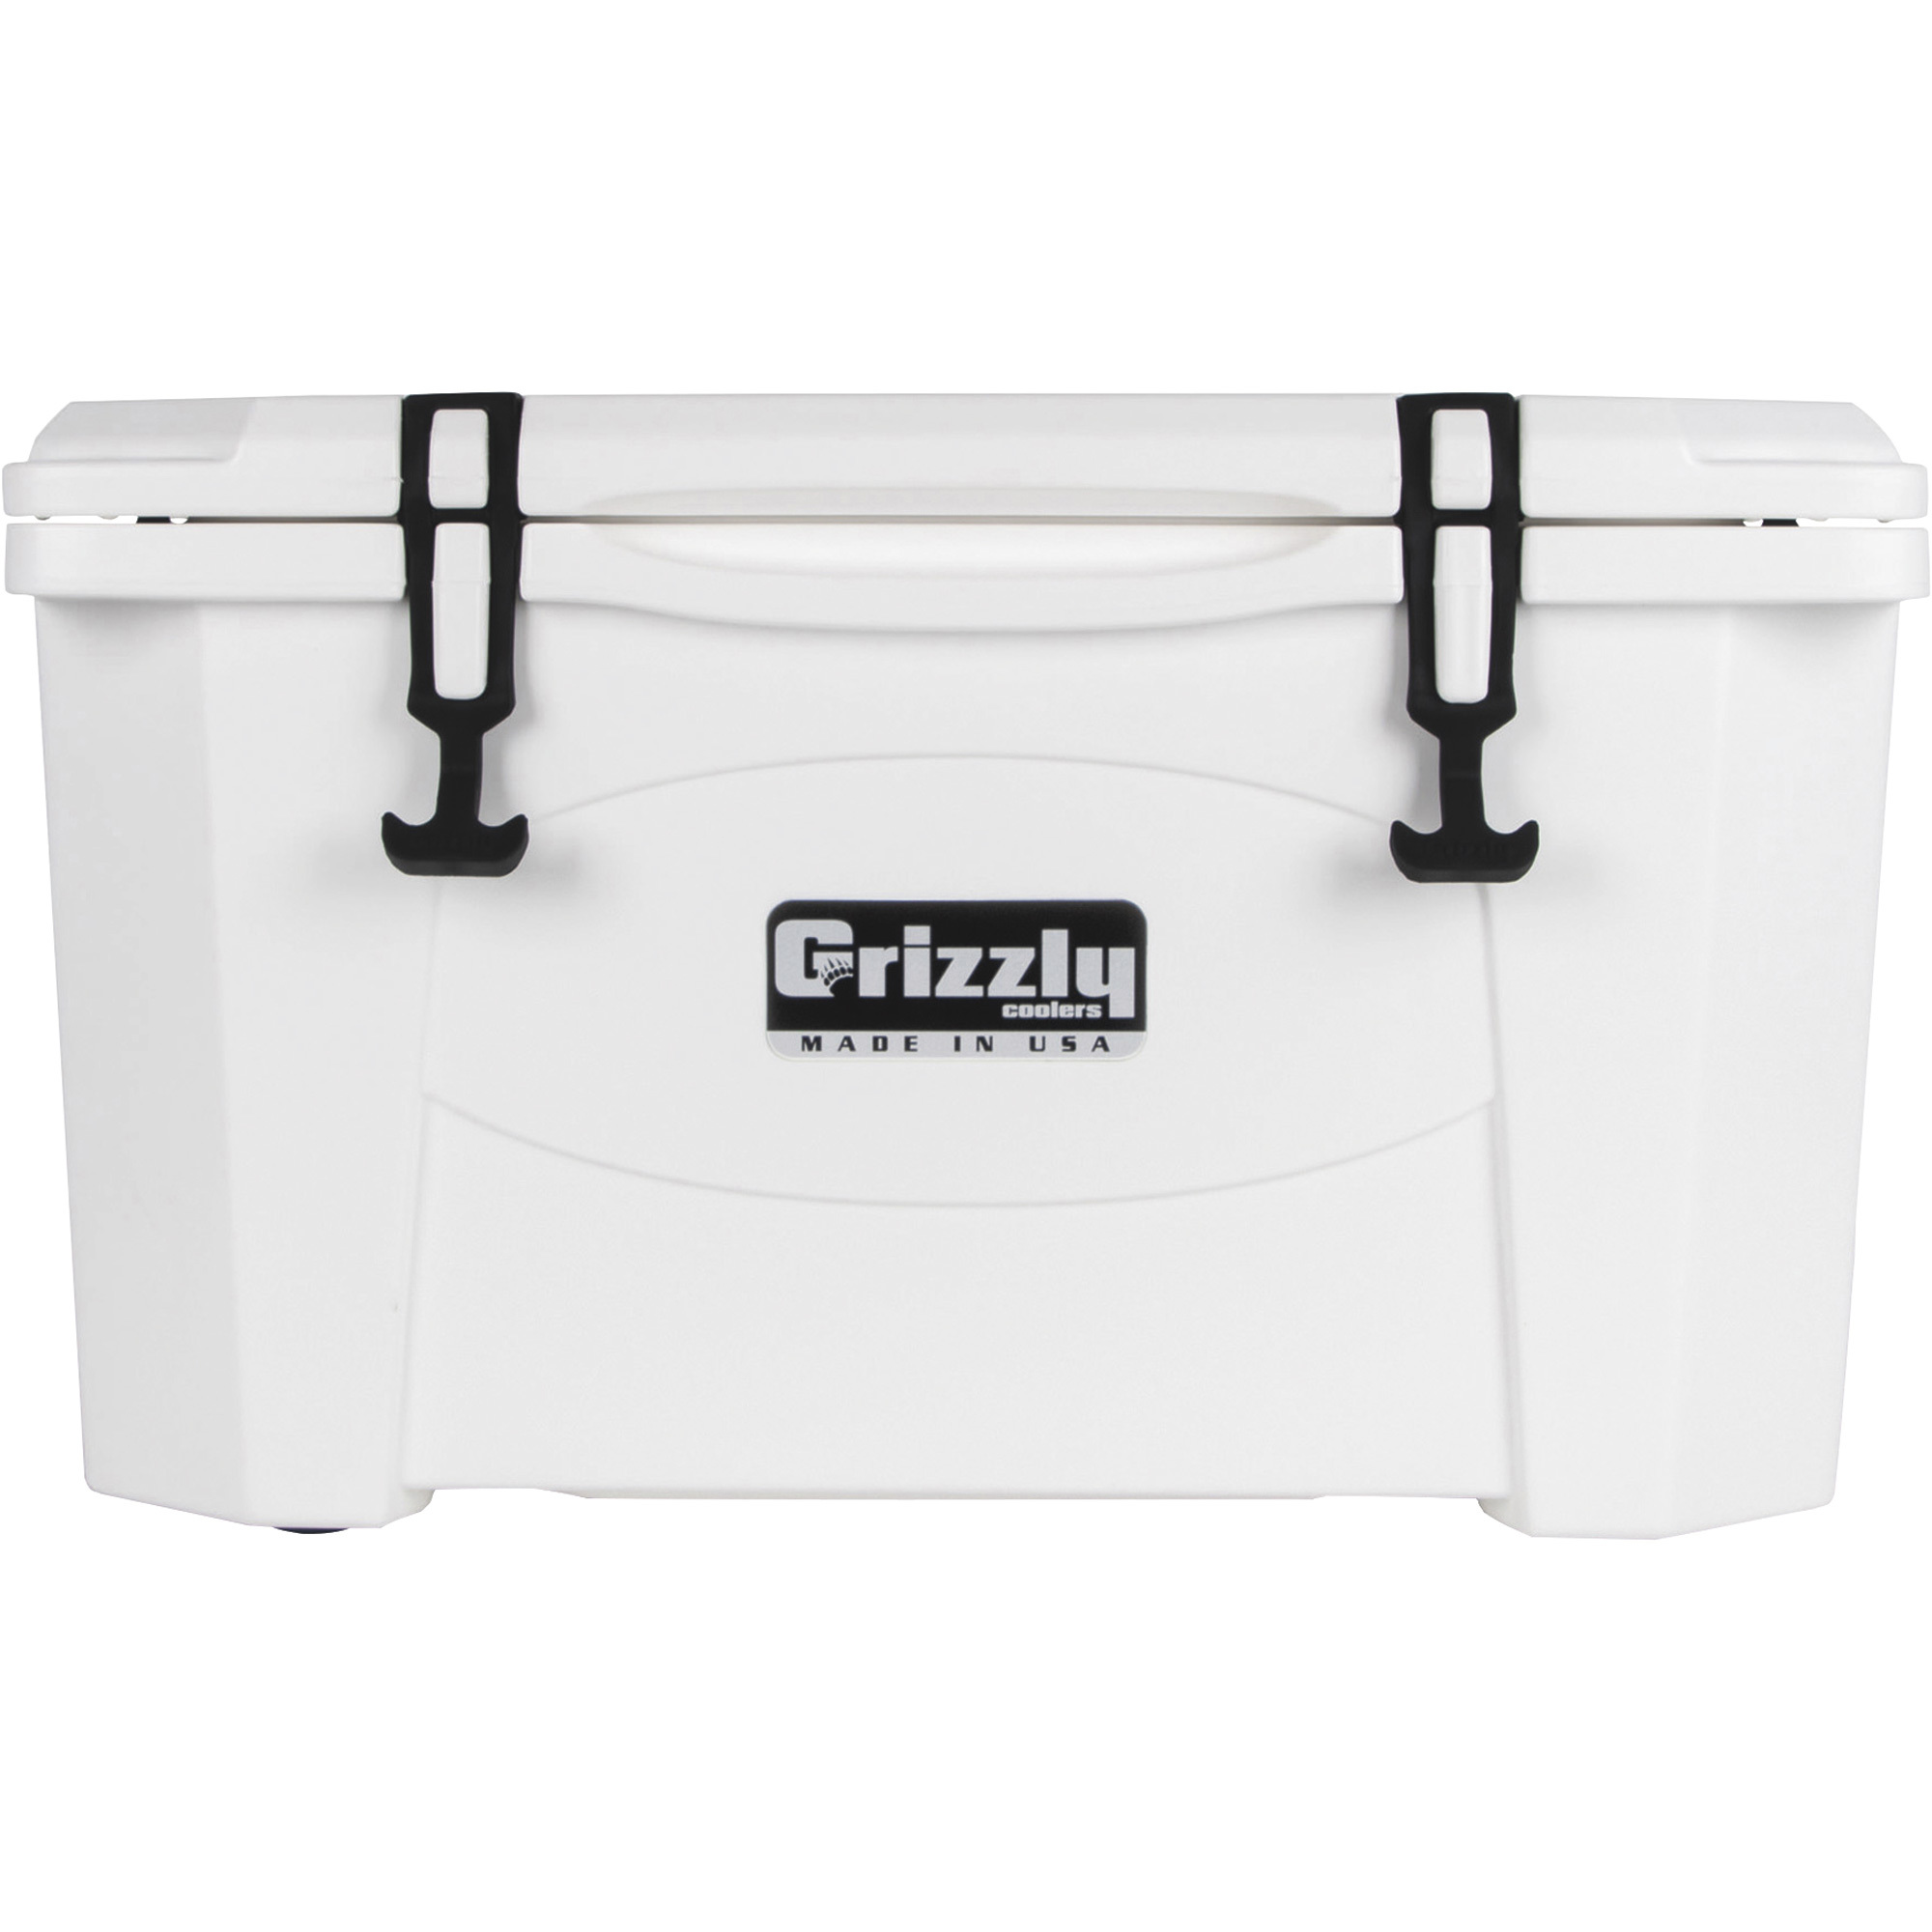 Grizzly Coolers 400012